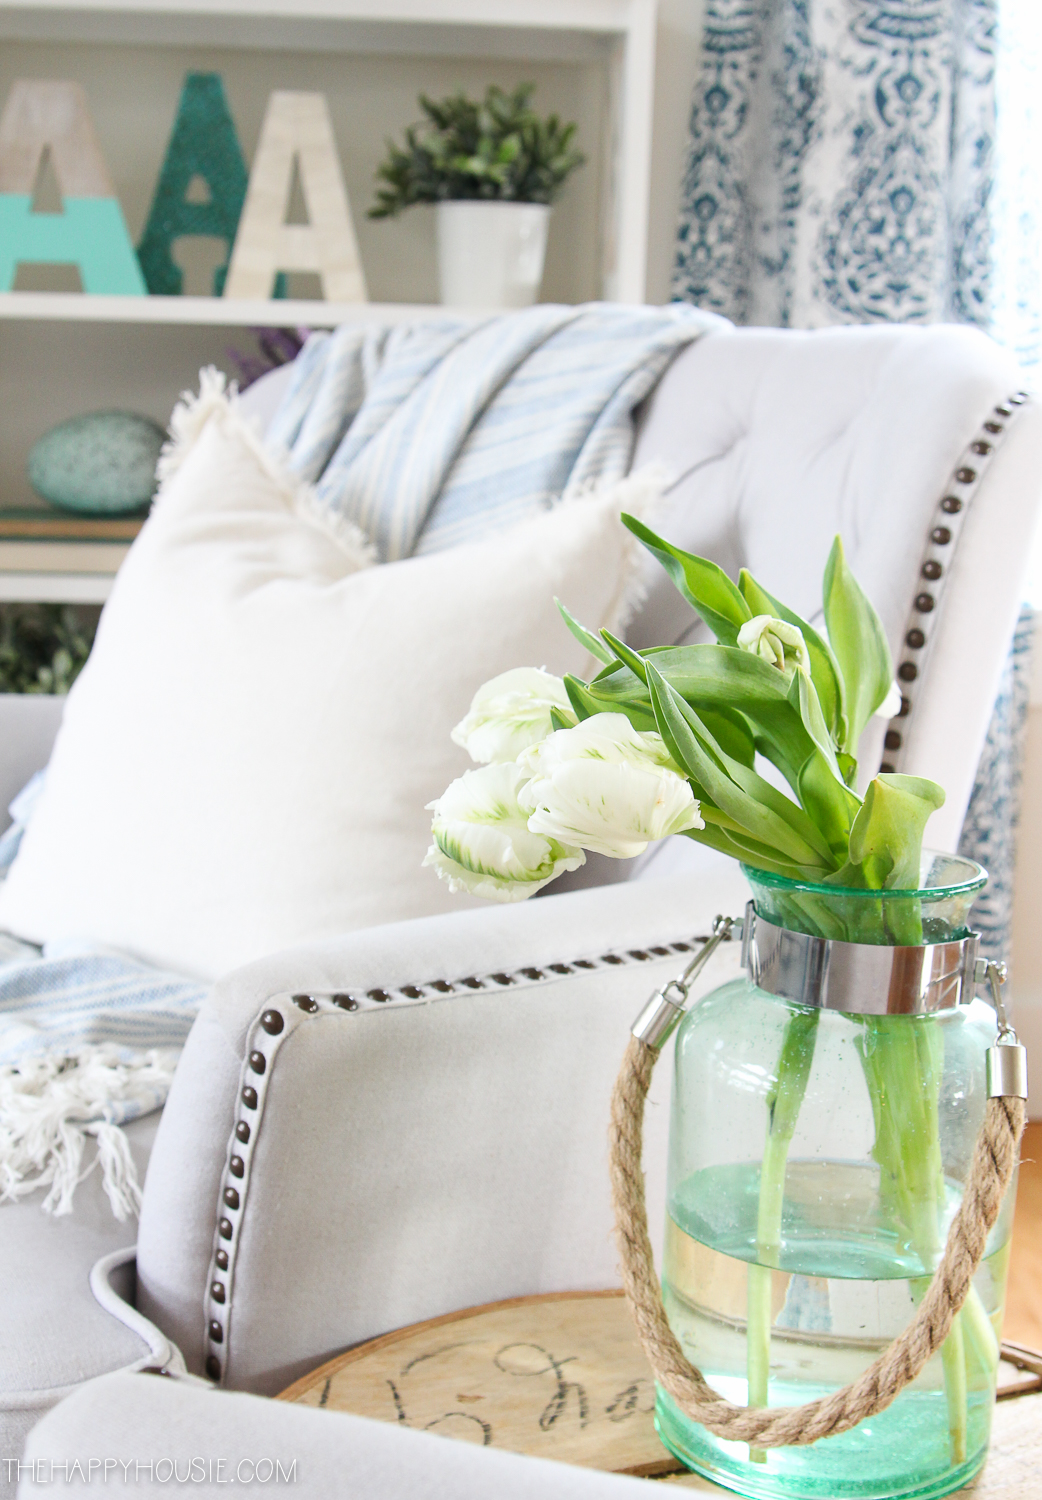 Decorating with Fabric • The Budget Decorator